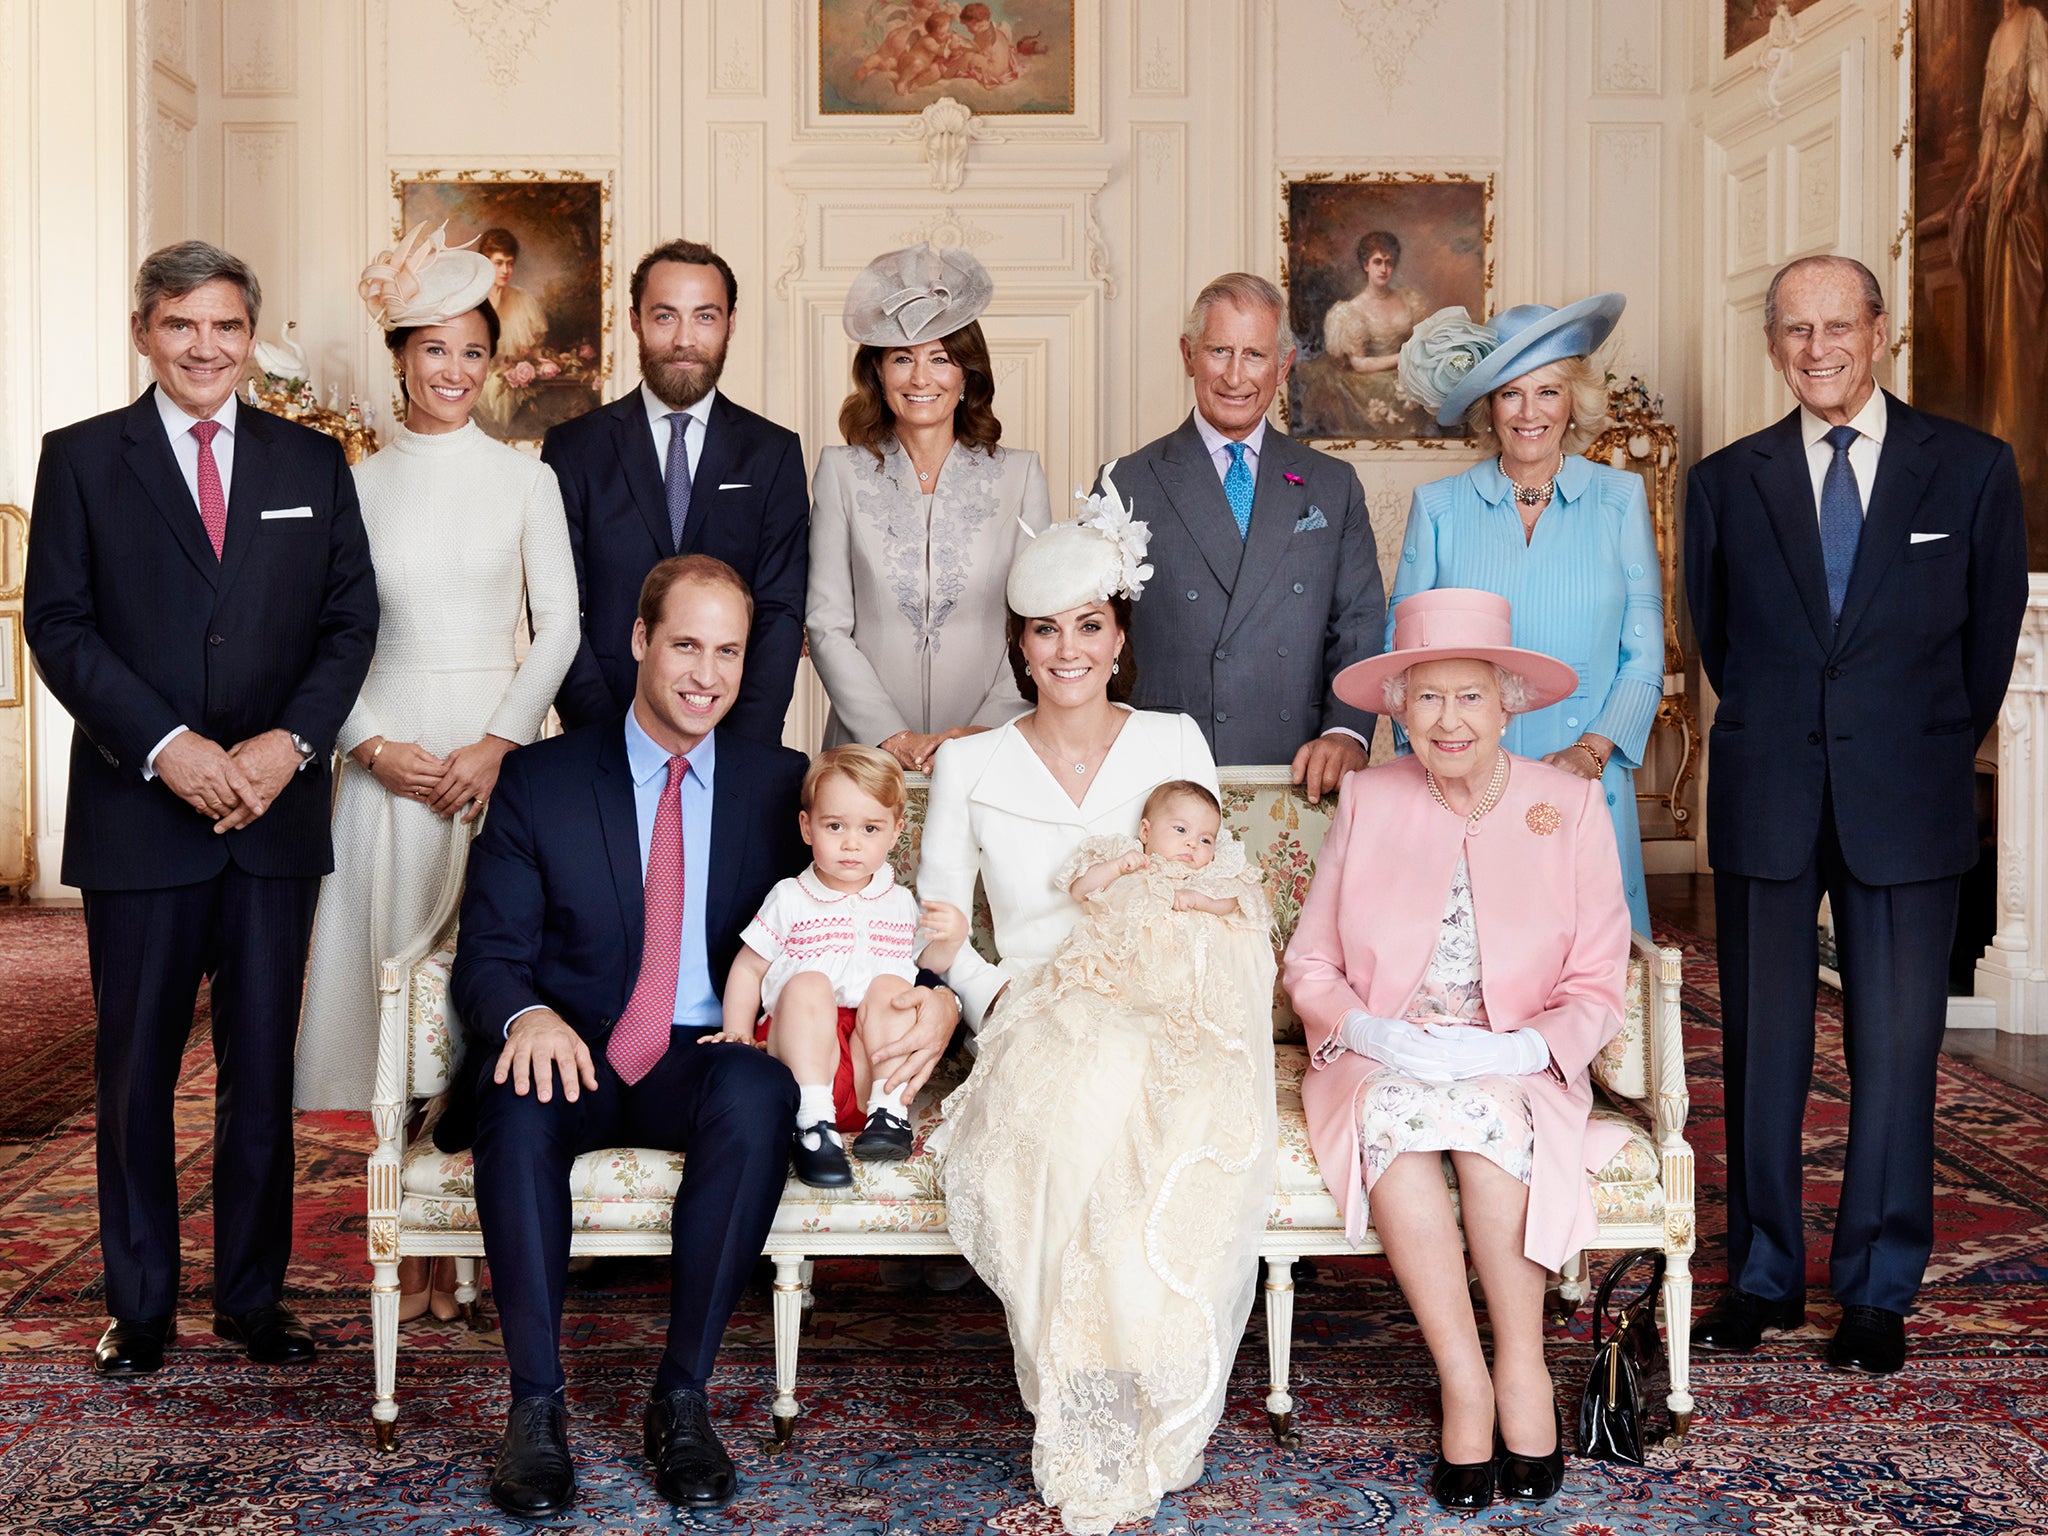 First official photographs of baby Charlotte's christening, taken by Diana's favourite photographer Mario Testino, have been released by Royal Family